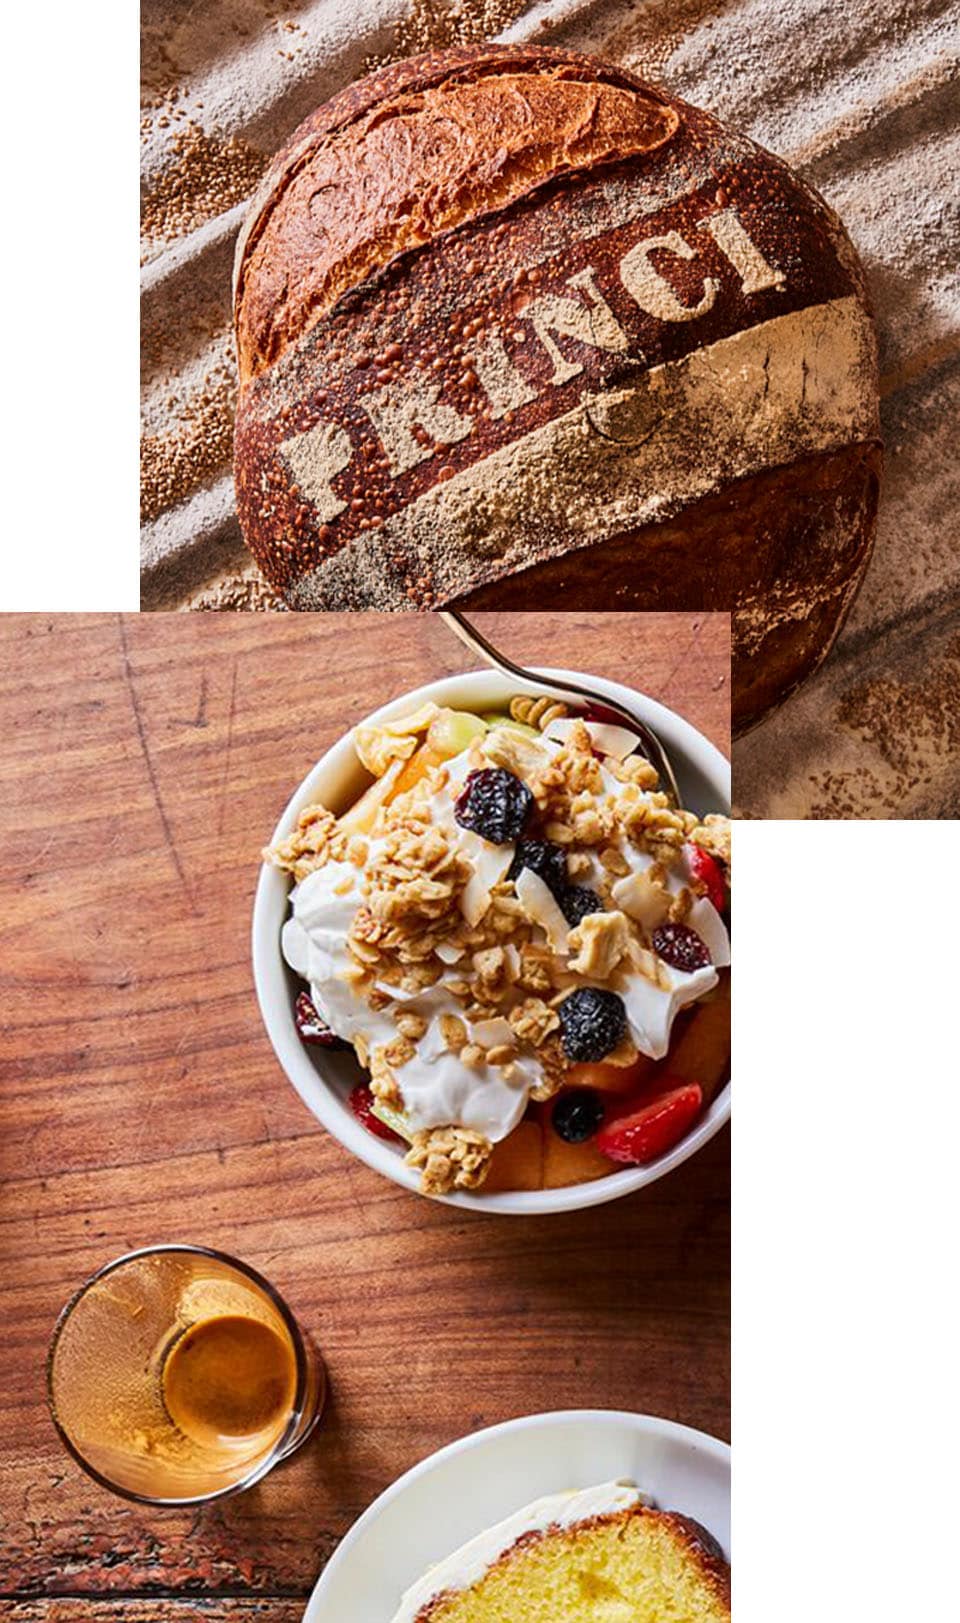 Image collage of a loaf of bread, pastries, and fruit and yogurt